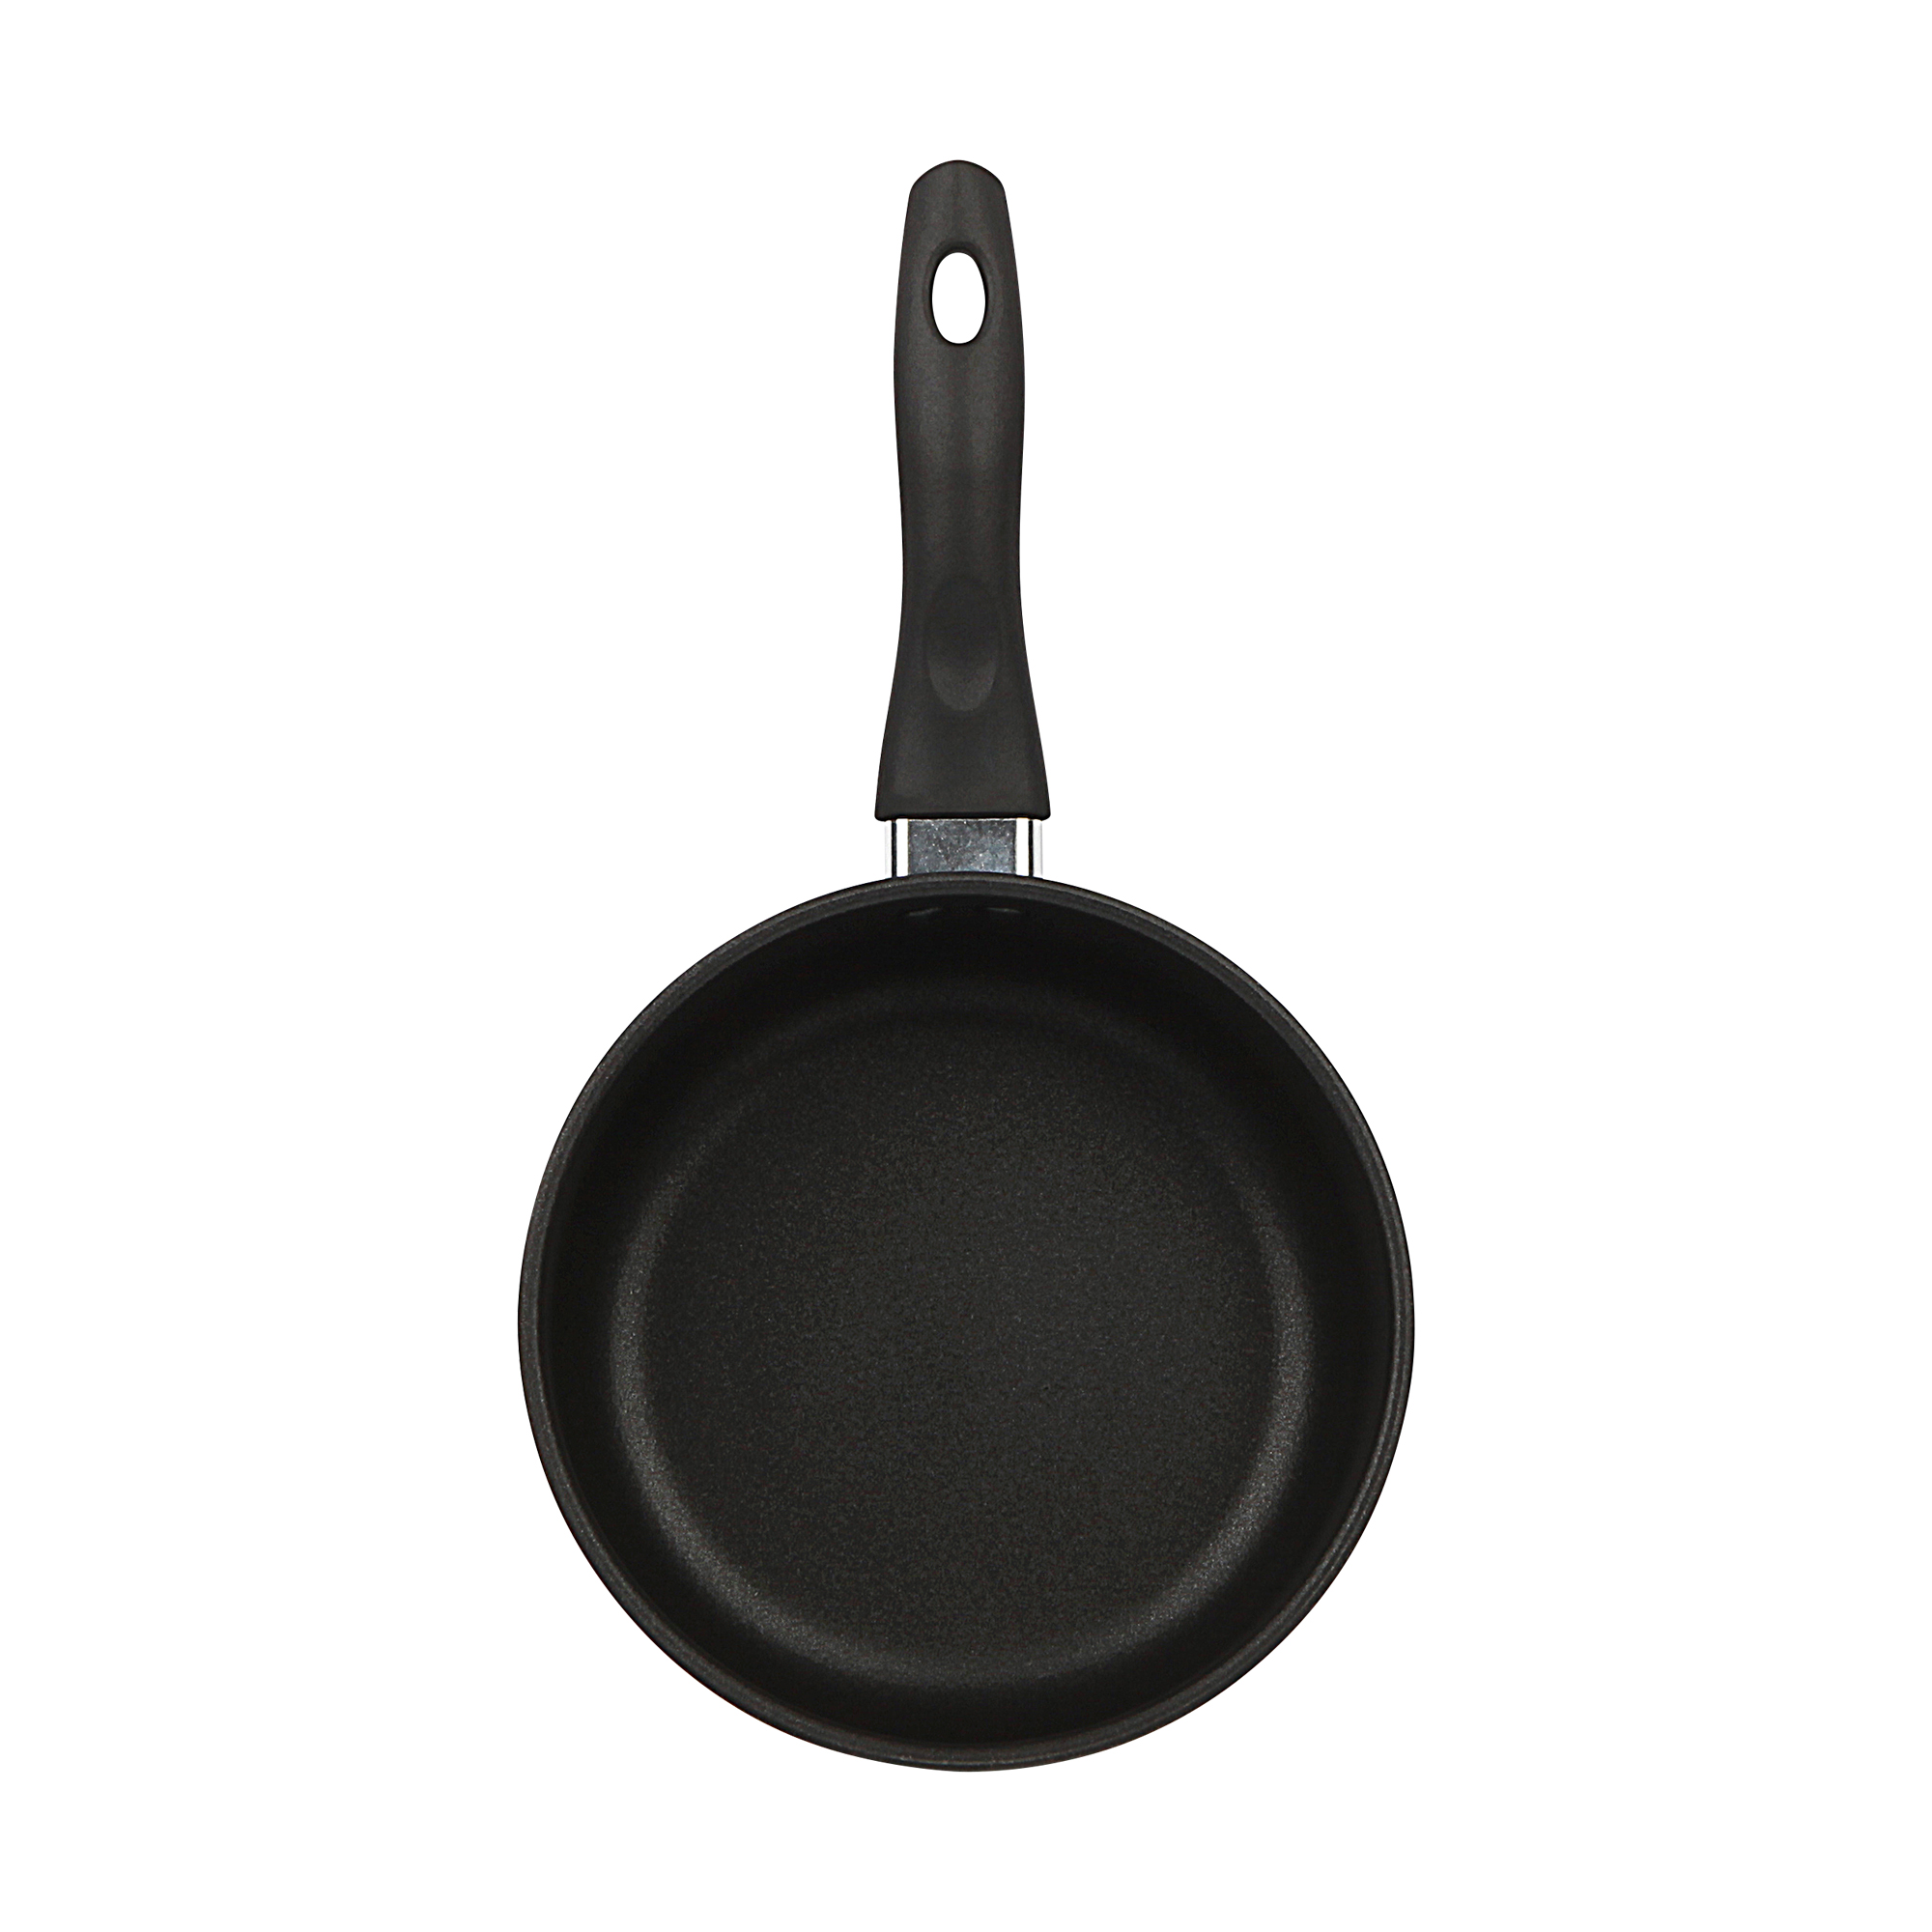 Mainstays Aluminum Alloy 8 inch Non-Stick Skillet 20cm Frypan - image 4 of 6